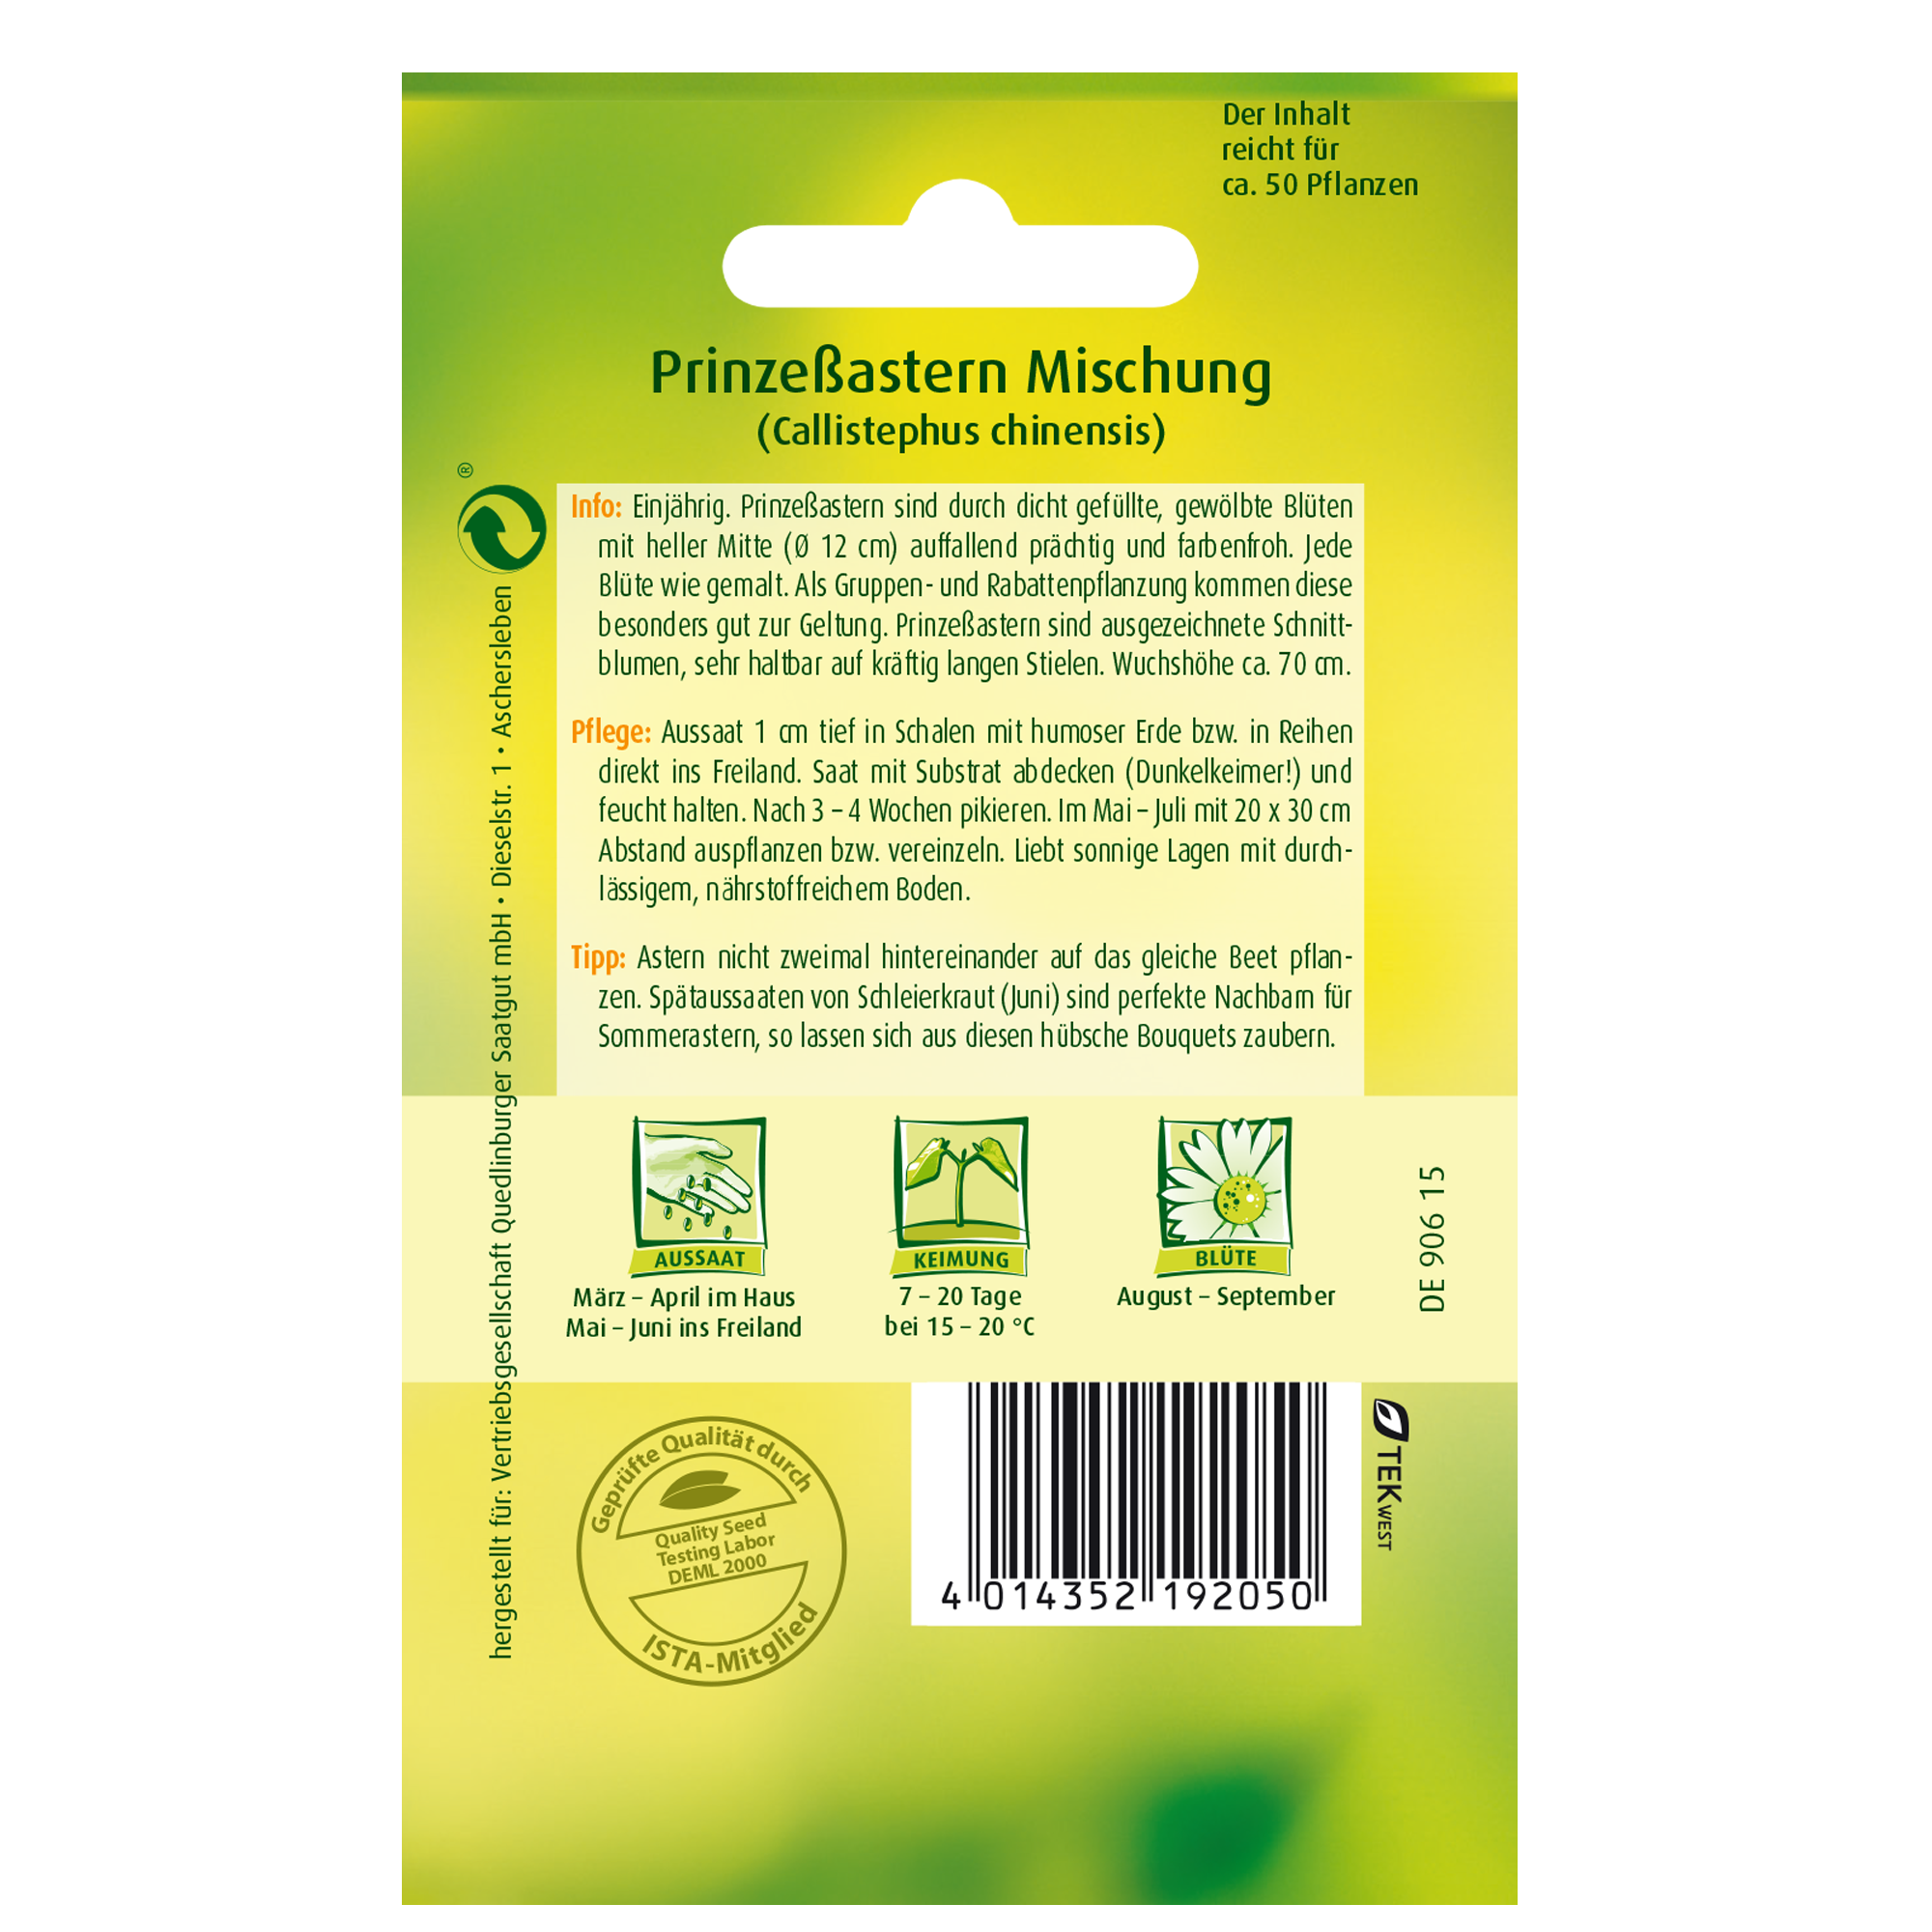 Prinzeßastern Mischung + product picture